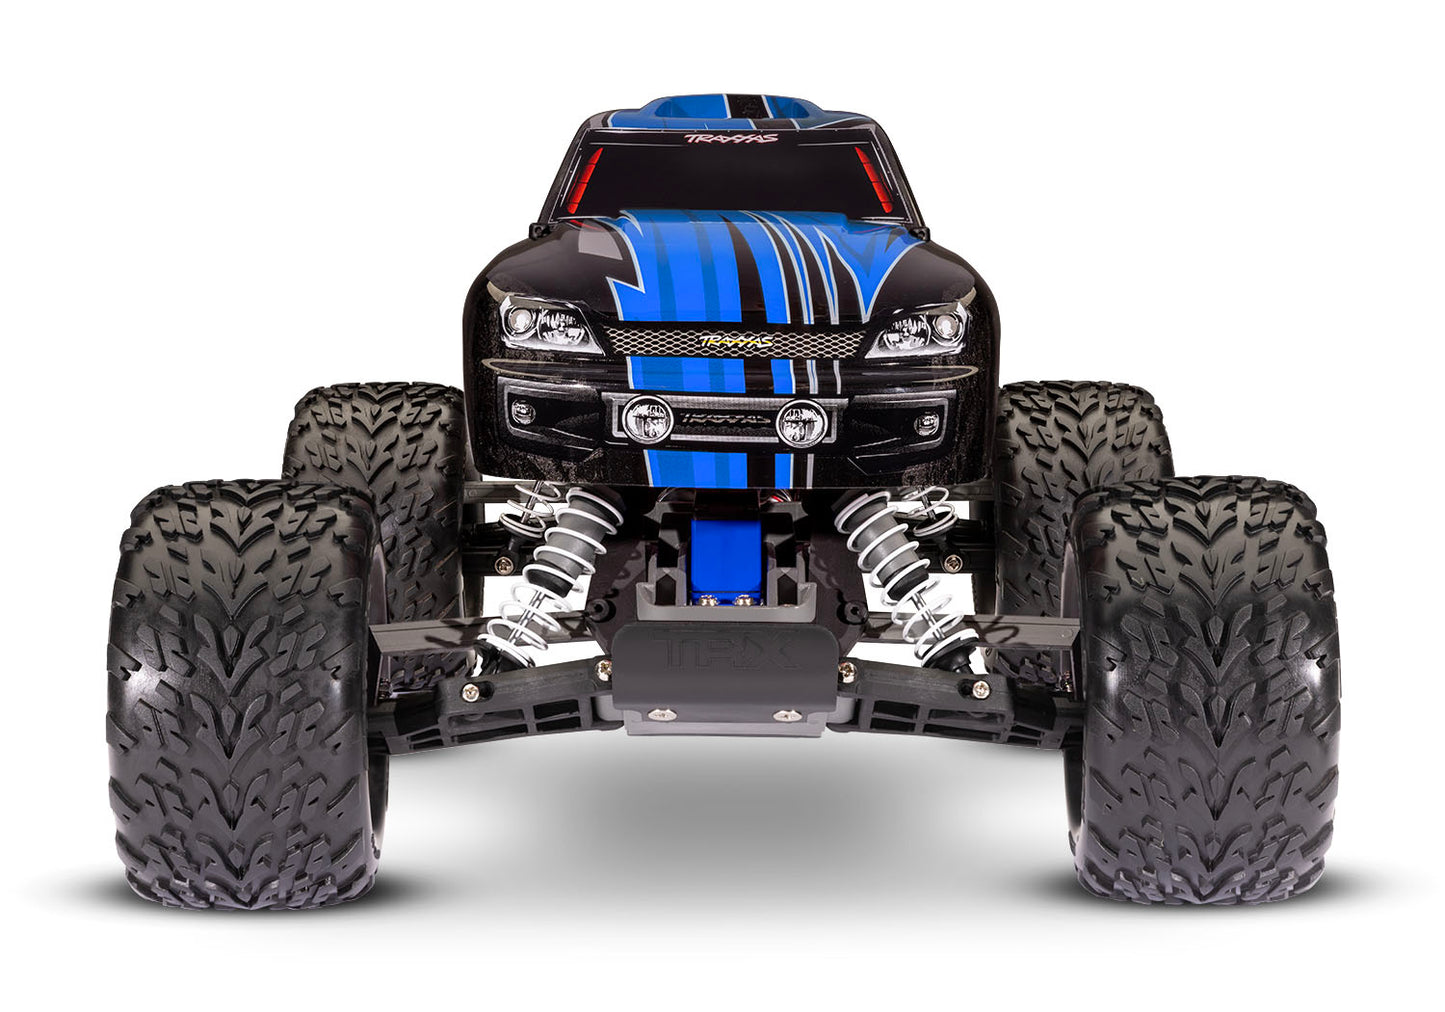 36054-8 Stampede: 1/10 Scale Monster Truck w/USB-C Blue